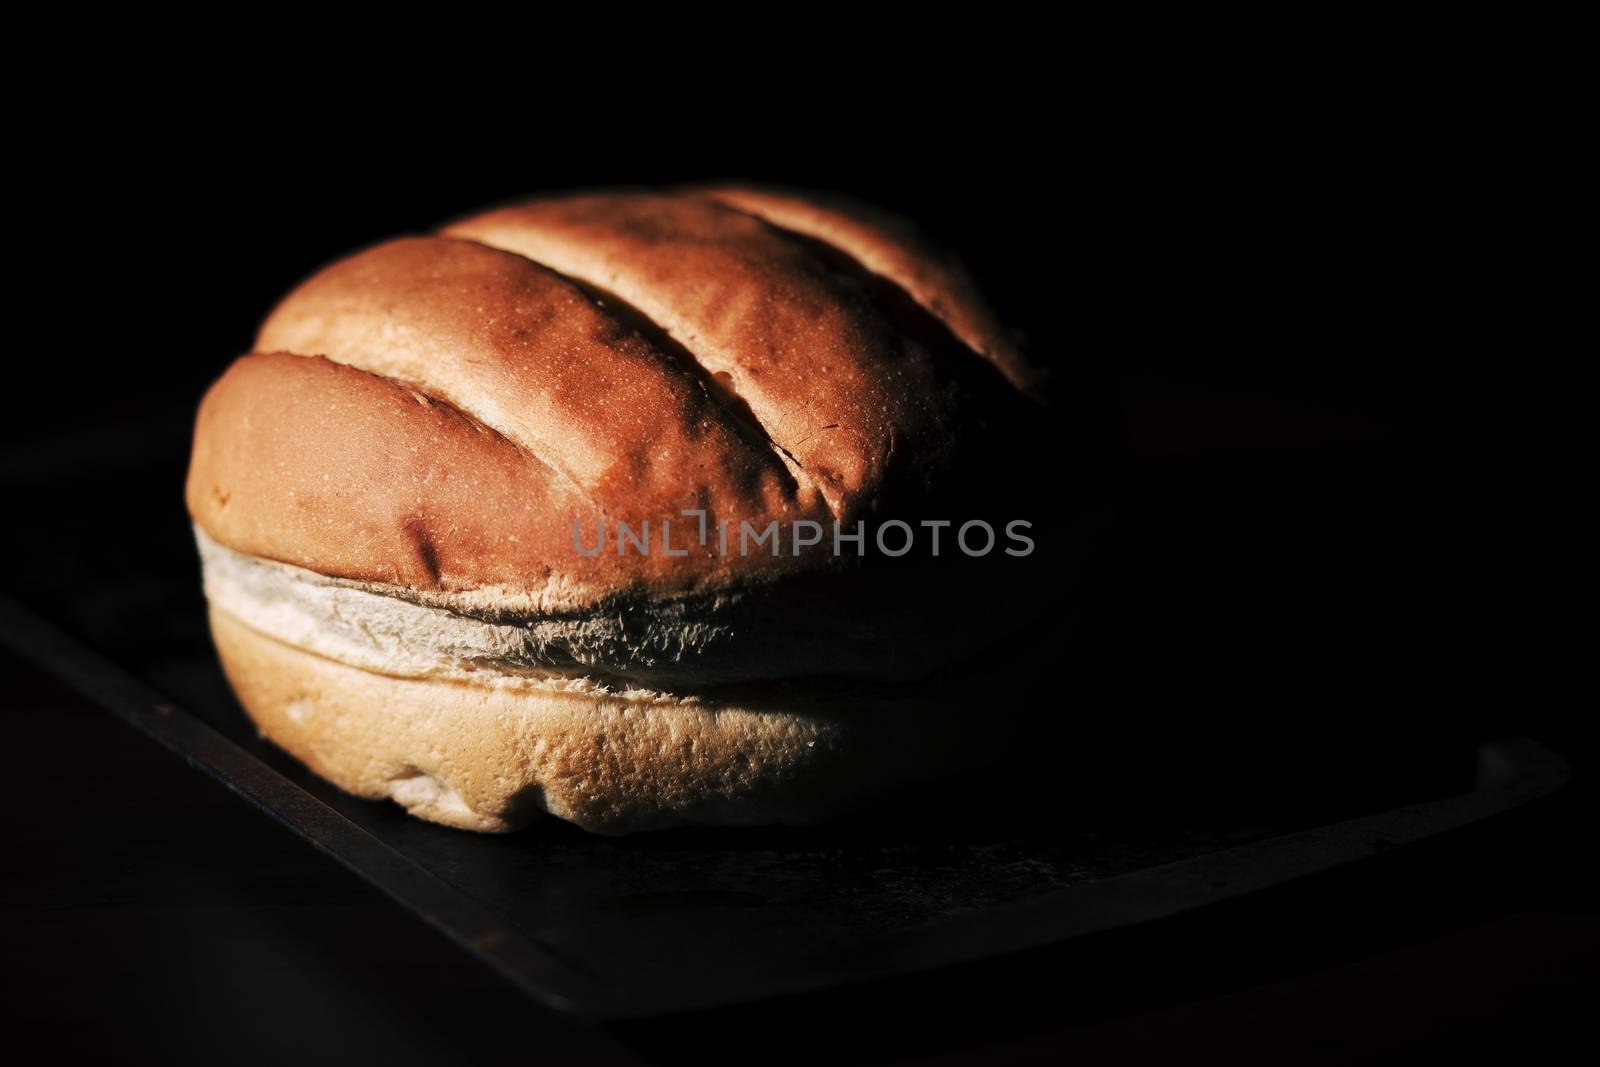 Round loaf of bread on a baking tray